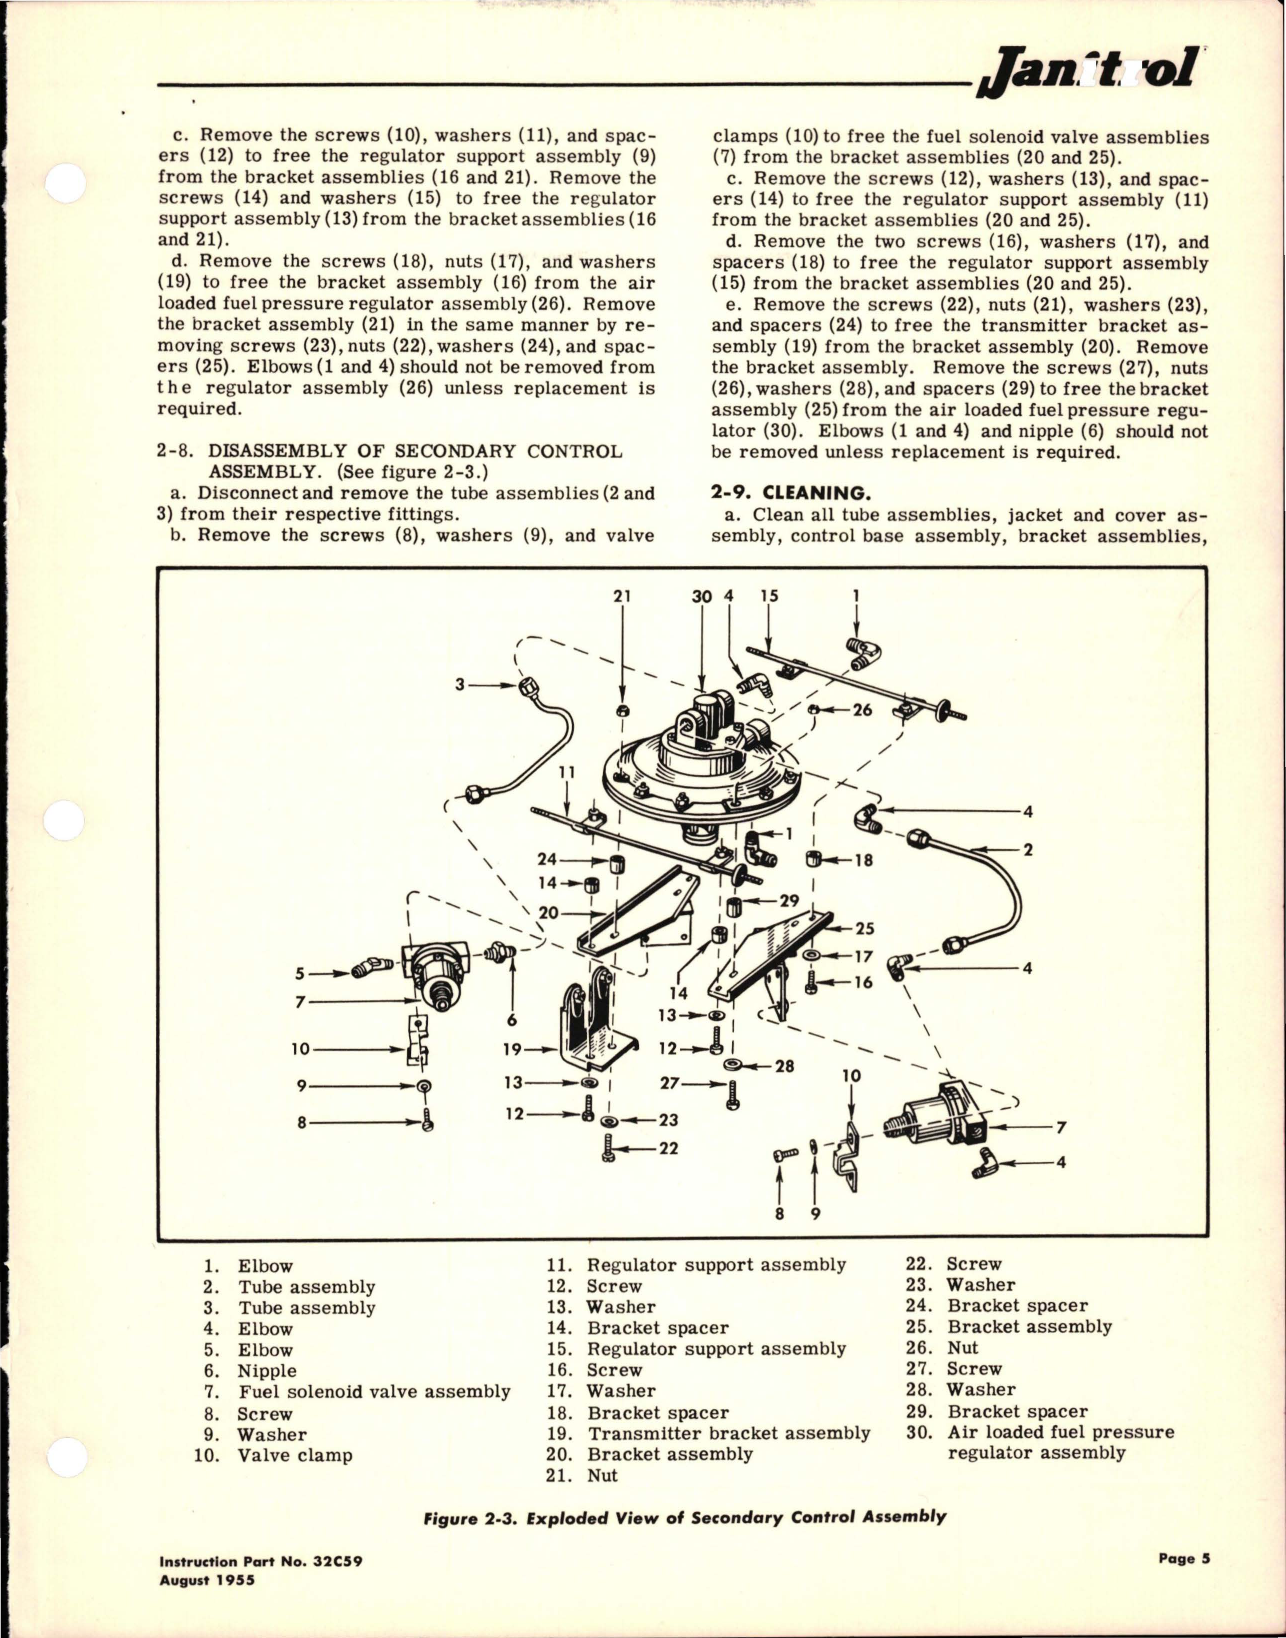 Sample page 5 from AirCorps Library document: Maintenance Instructions for Sealed Control Assembly - Part 26C98